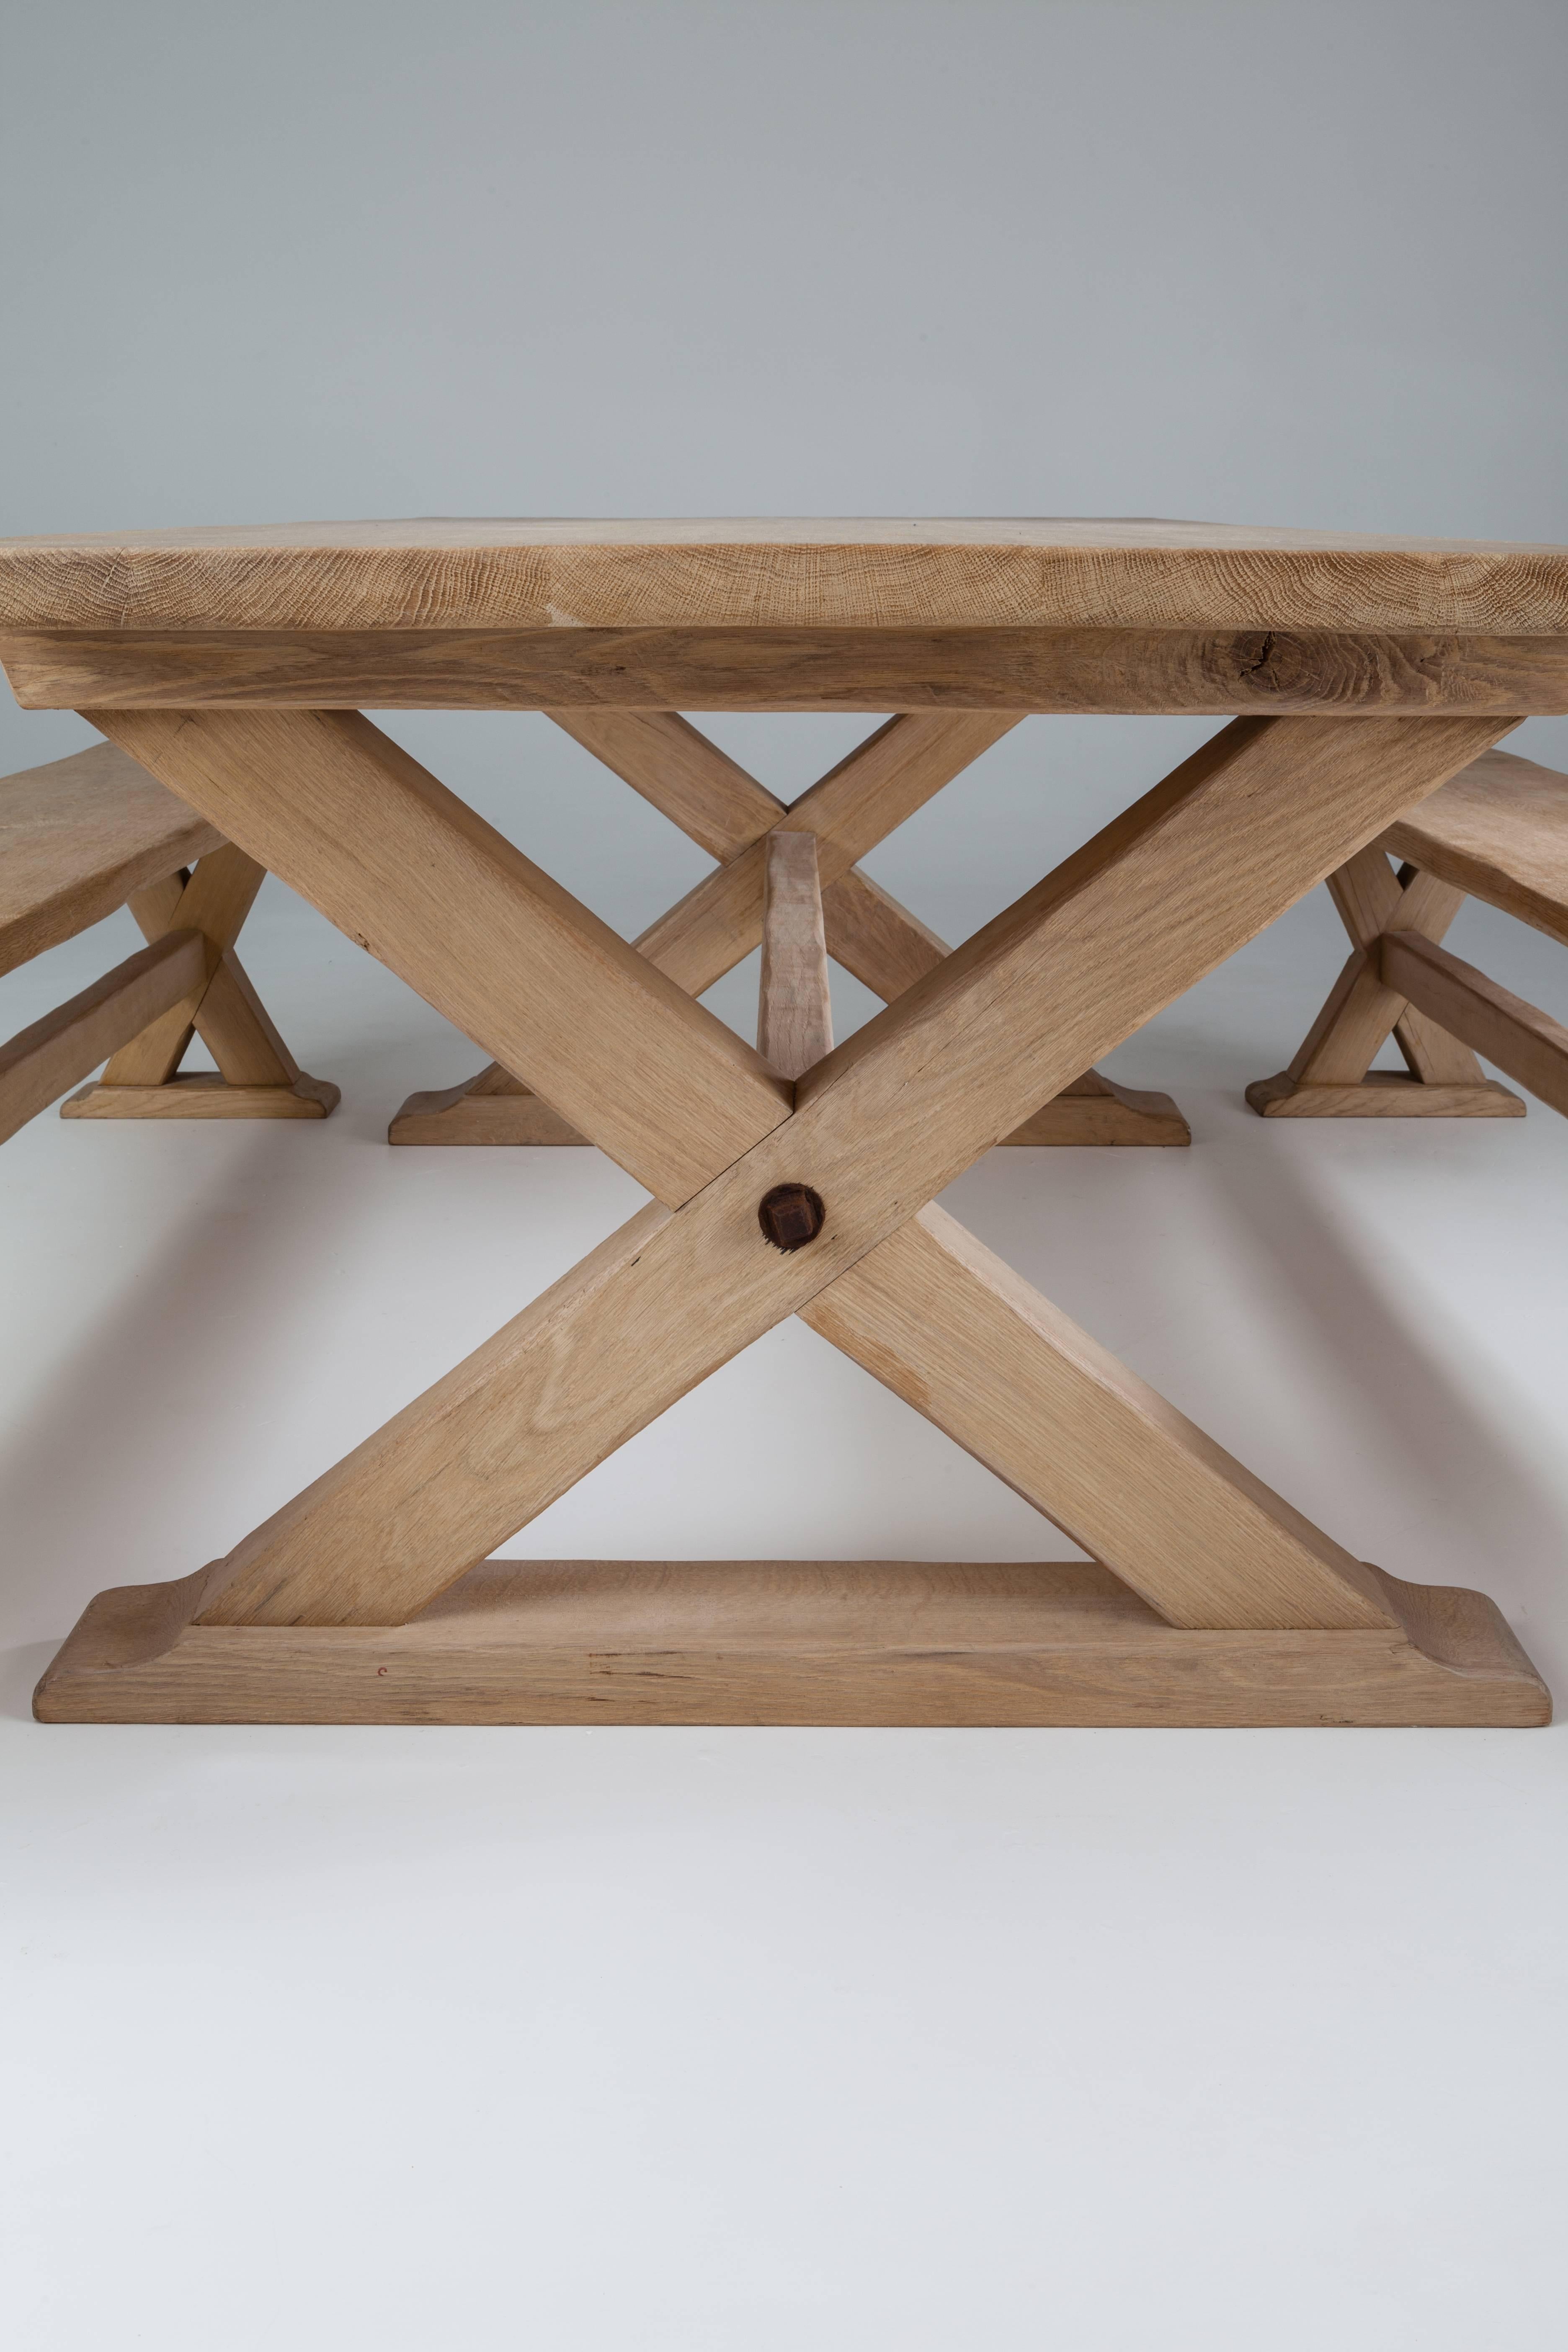 Rectangular, on a cross frame support with exposed bolts in Arts & Crafts style. Available in a range of natural and stained wood finishes. Made up to 400 cm long. 250 cm table £4250; 300 cm table £4,950; 350 cm table £5,750; 400 cm table £5,950;